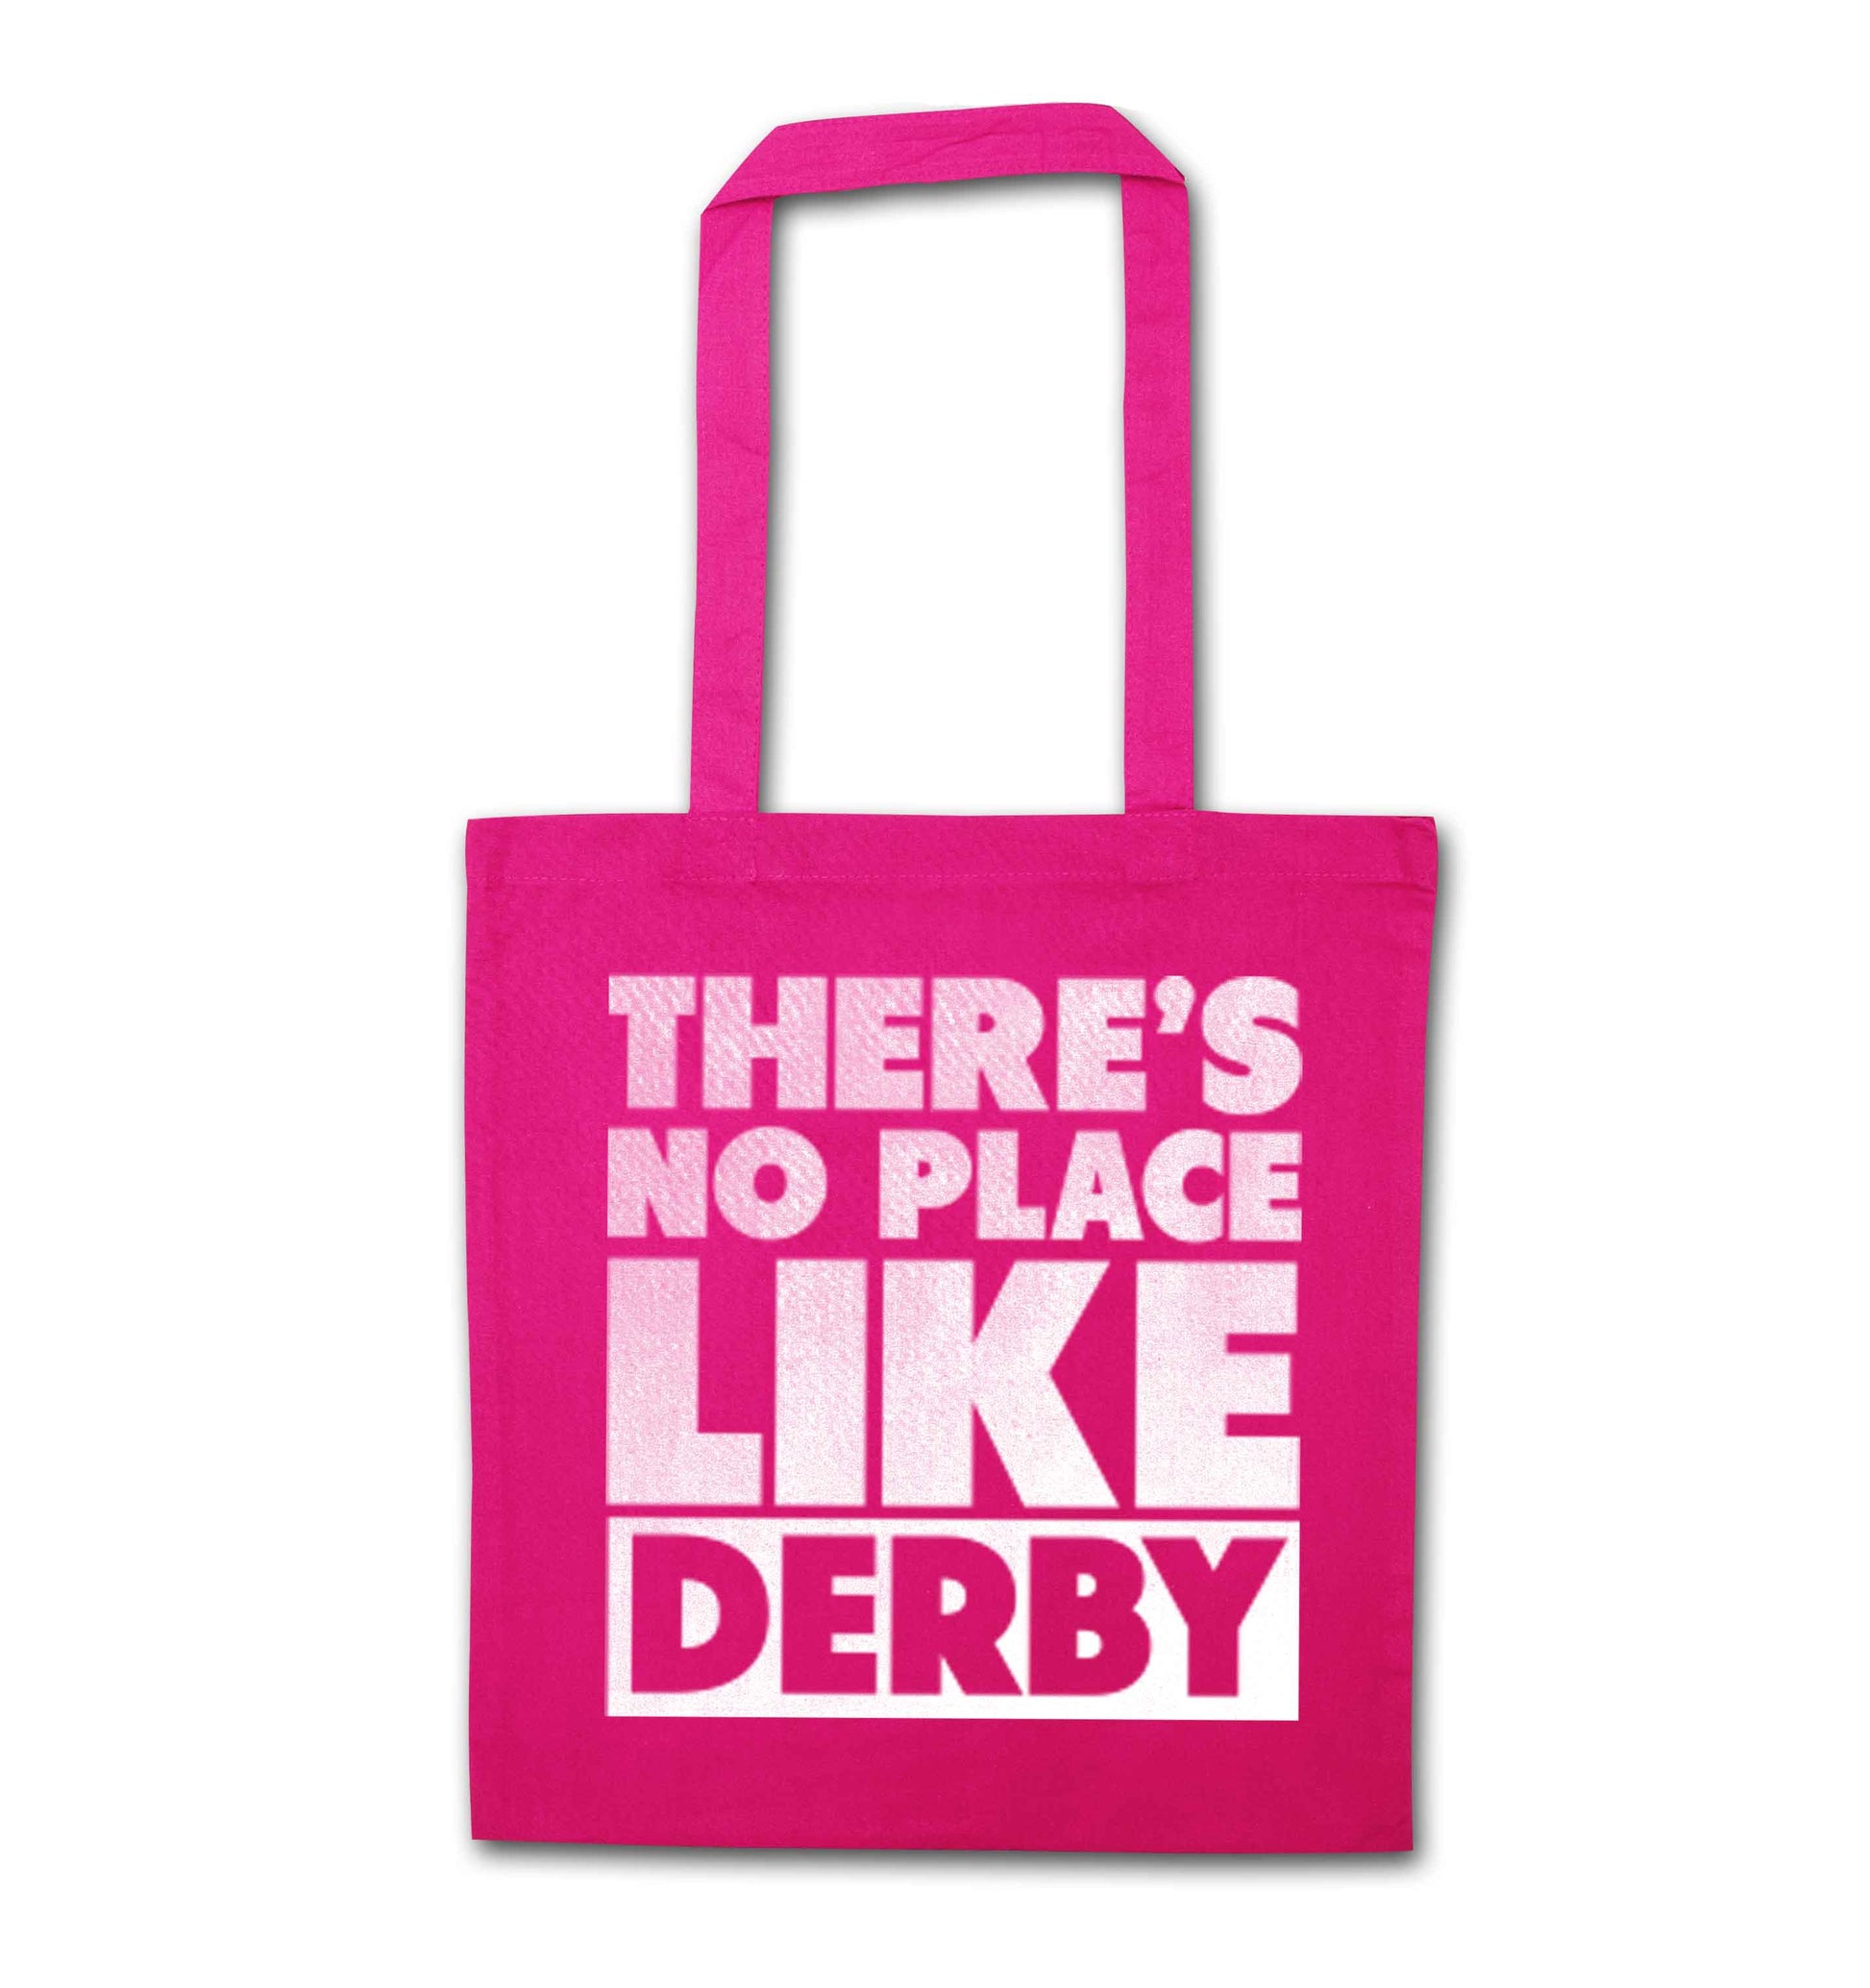 There's no place like Derby pink tote bag